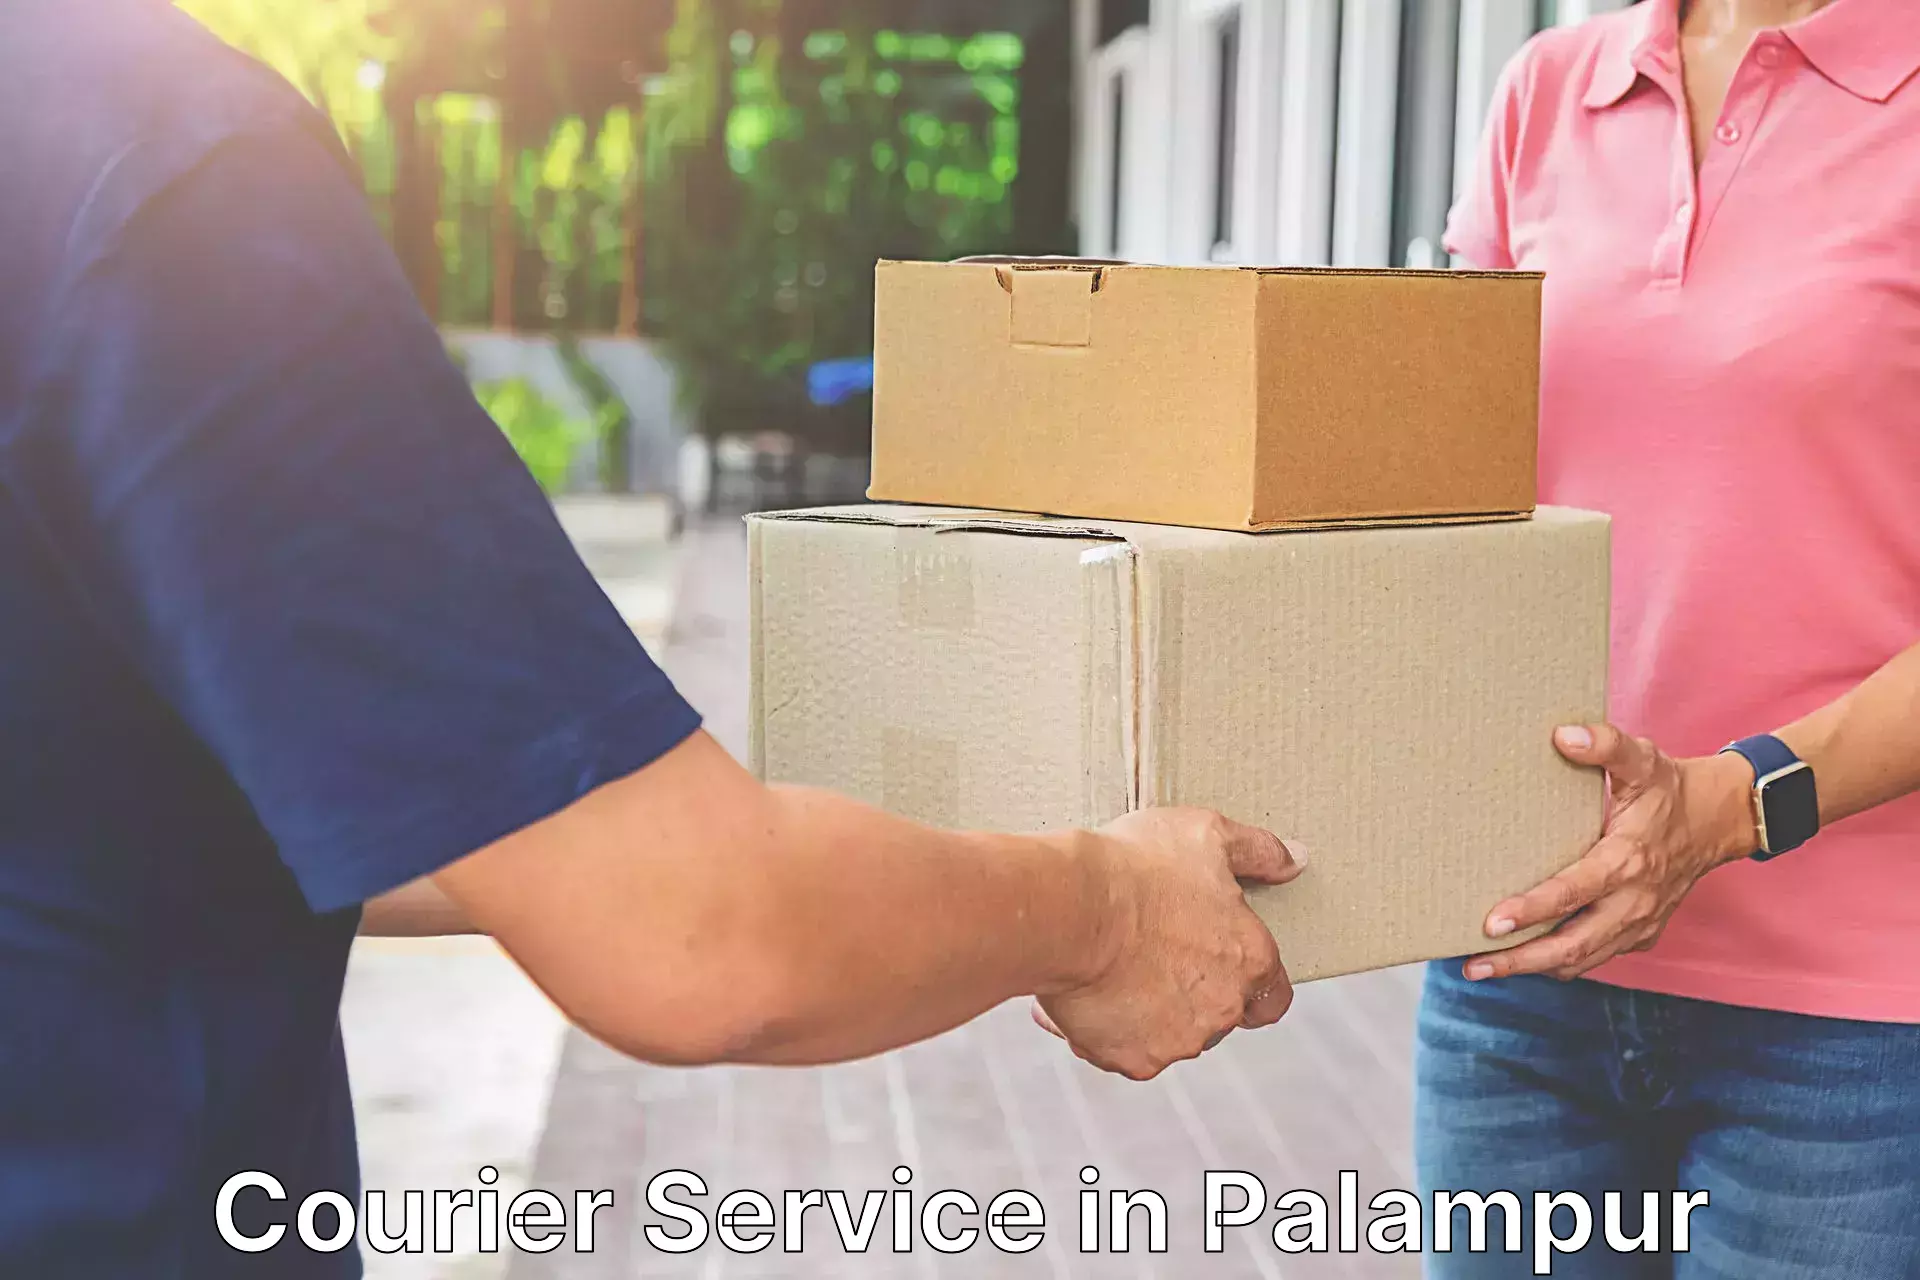 Rapid freight solutions in Palampur